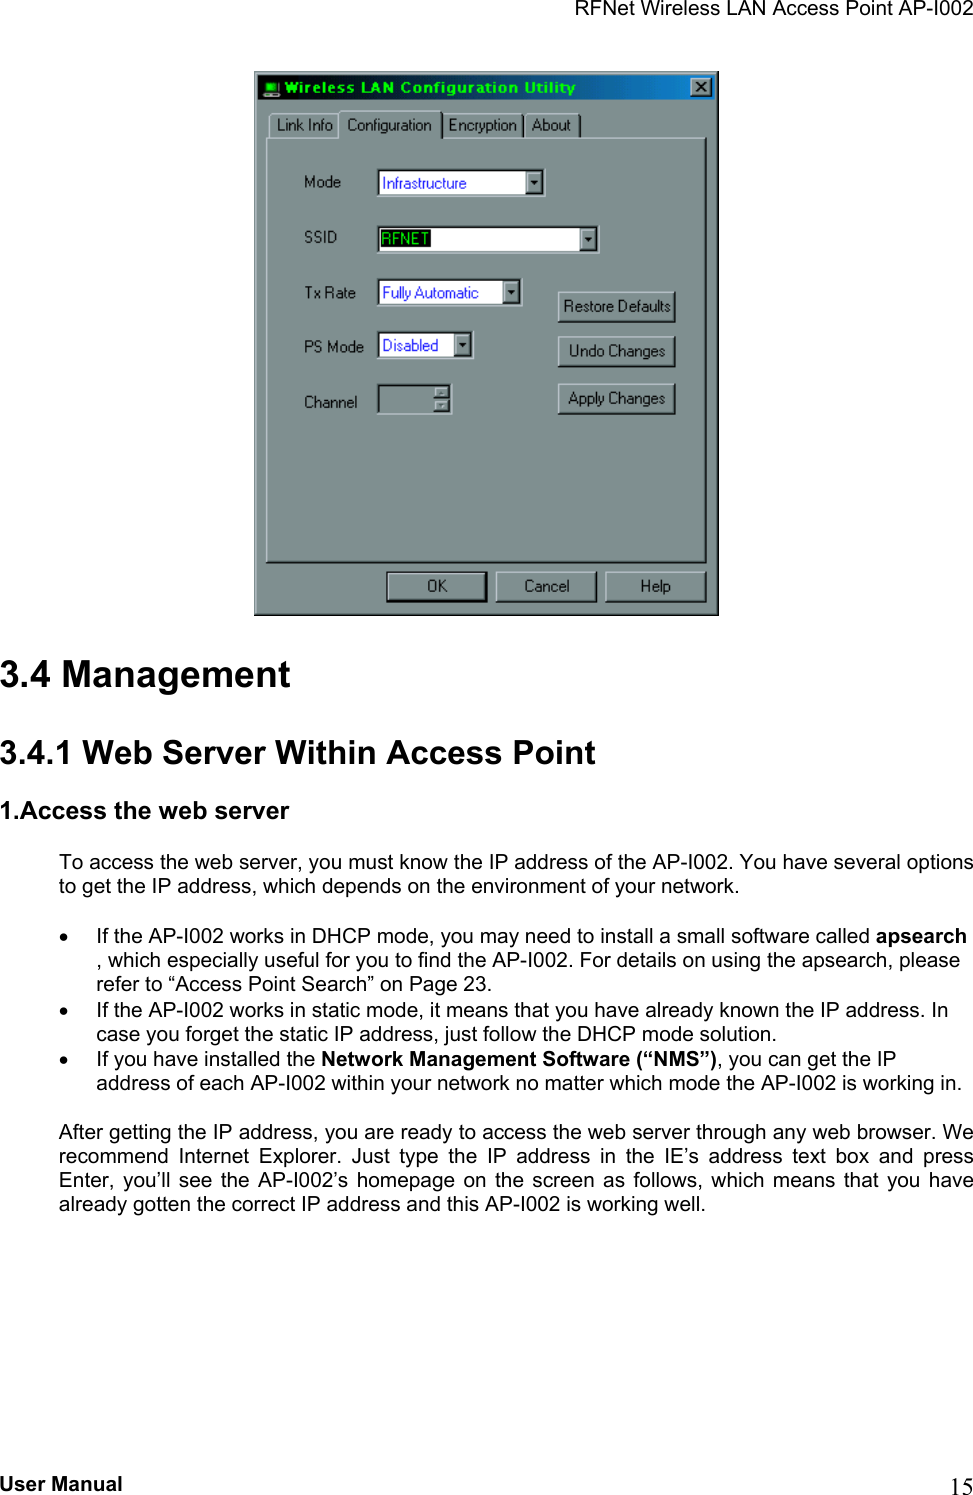 RFNet Wireless LAN Access Point AP-I002  3.4 Management 3.4.1 Web Server Within Access Point 1.Access the web server To access the web server, you must know the IP address of the AP-I002. You have several options to get the IP address, which depends on the environment of your network. •  If the AP-I002 works in DHCP mode, you may need to install a small software called apsearch , which especially useful for you to find the AP-I002. For details on using the apsearch, please refer to “Access Point Search” on Page 23. •  If the AP-I002 works in static mode, it means that you have already known the IP address. In case you forget the static IP address, just follow the DHCP mode solution.             •  If you have installed the Network Management Software (“NMS”), you can get the IP address of each AP-I002 within your network no matter which mode the AP-I002 is working in. After getting the IP address, you are ready to access the web server through any web browser. We recommend Internet Explorer. Just type the IP address in the IE’s address text box and press Enter, you’ll see the AP-I002’s homepage on the screen as follows, which means that you have already gotten the correct IP address and this AP-I002 is working well. User Manual  15 